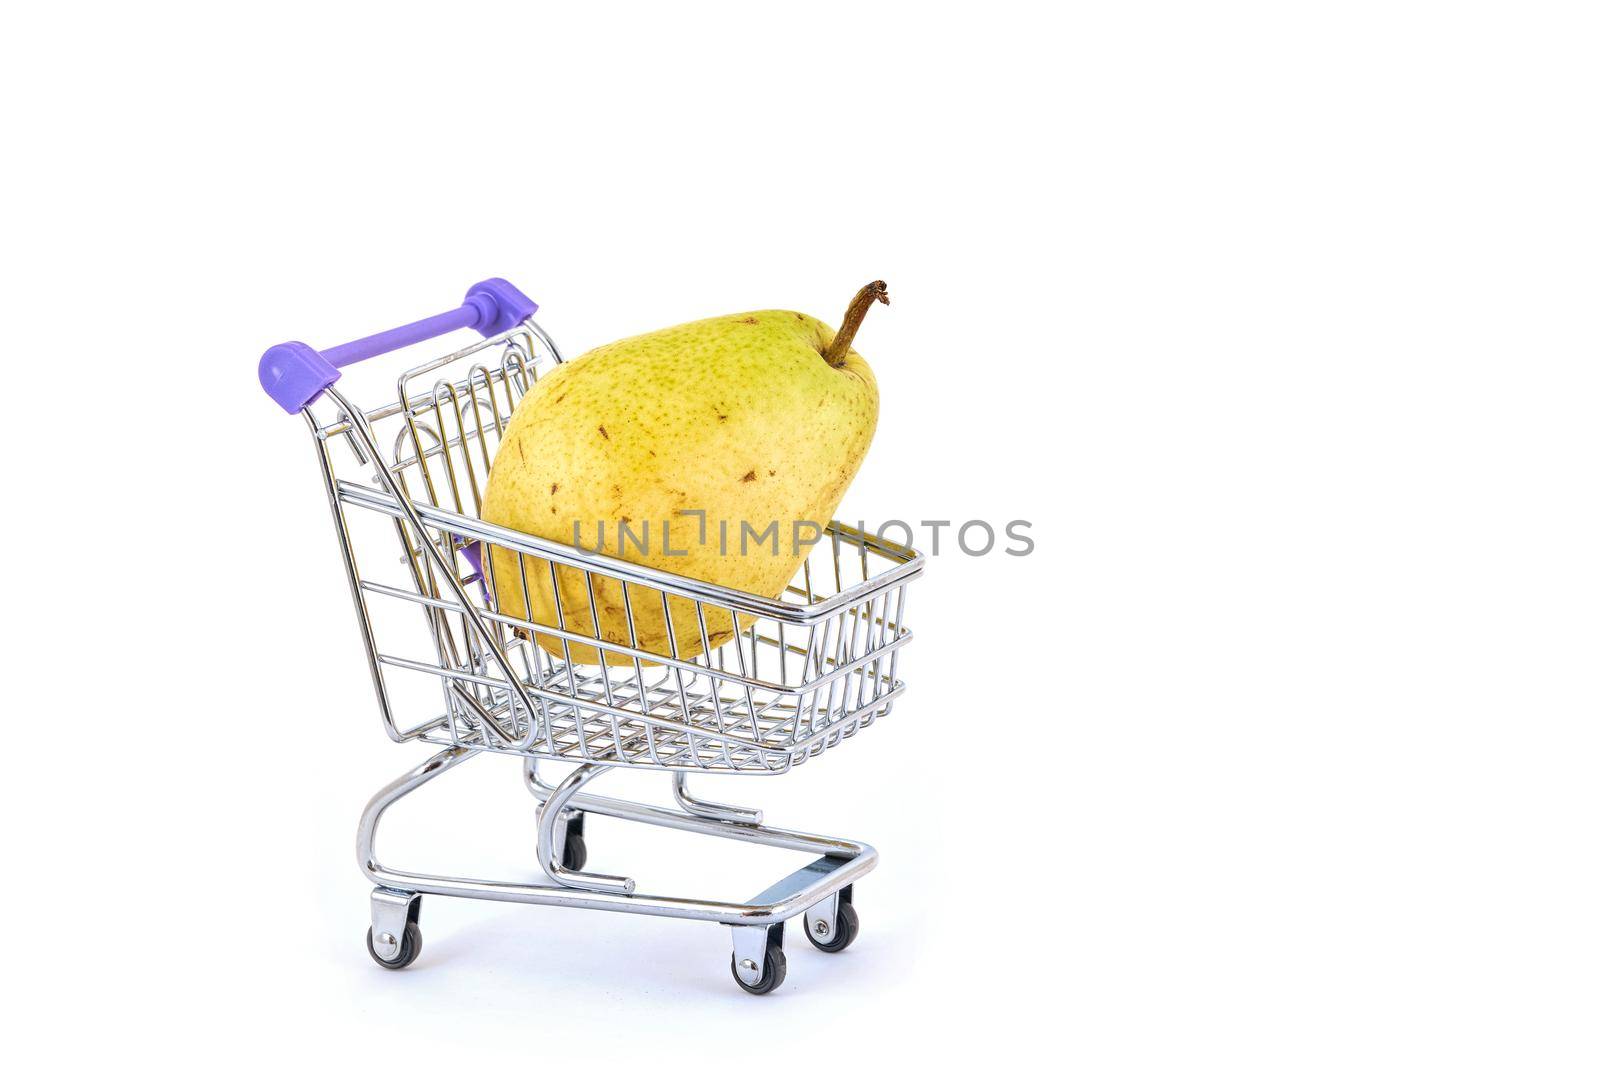 Ripe pear in a supermarket trolley on a white background by vizland